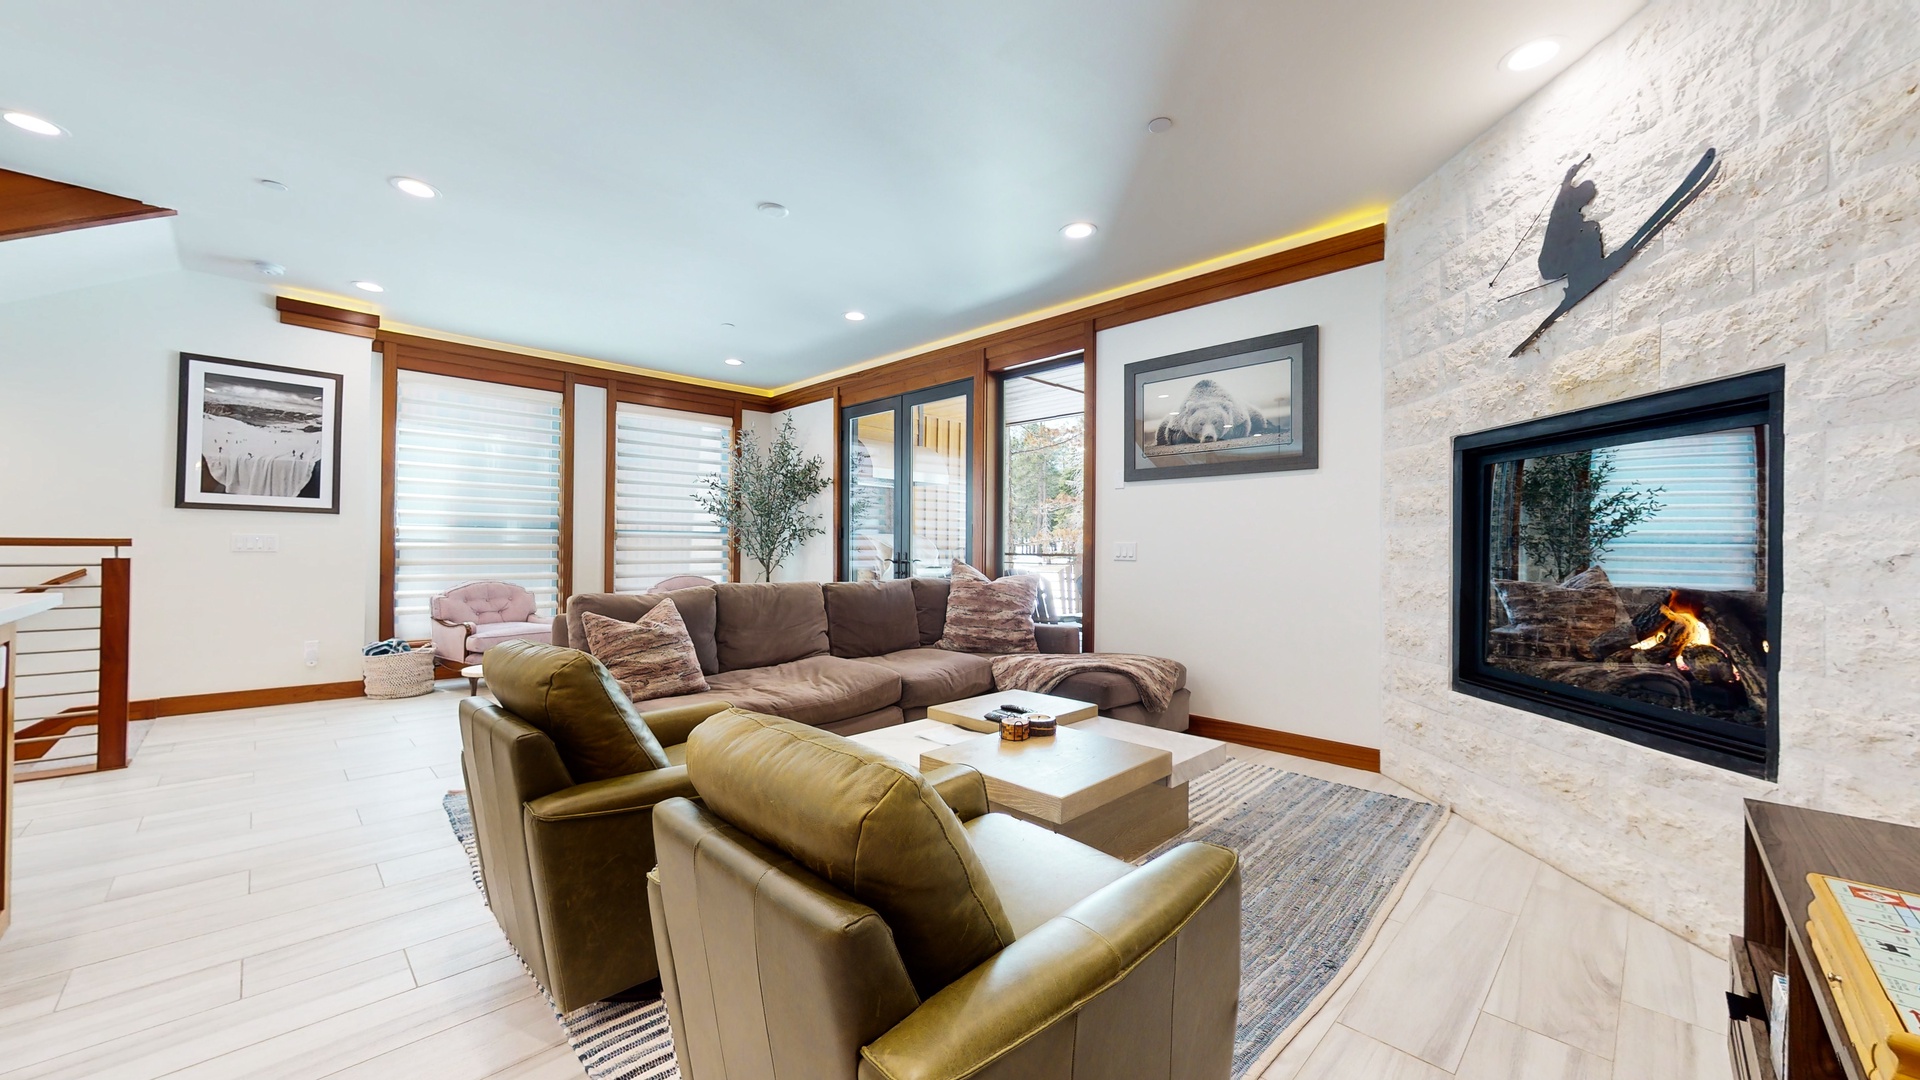 Curl up for a movie or enjoy a warming fire in the living room’s gas fireplace